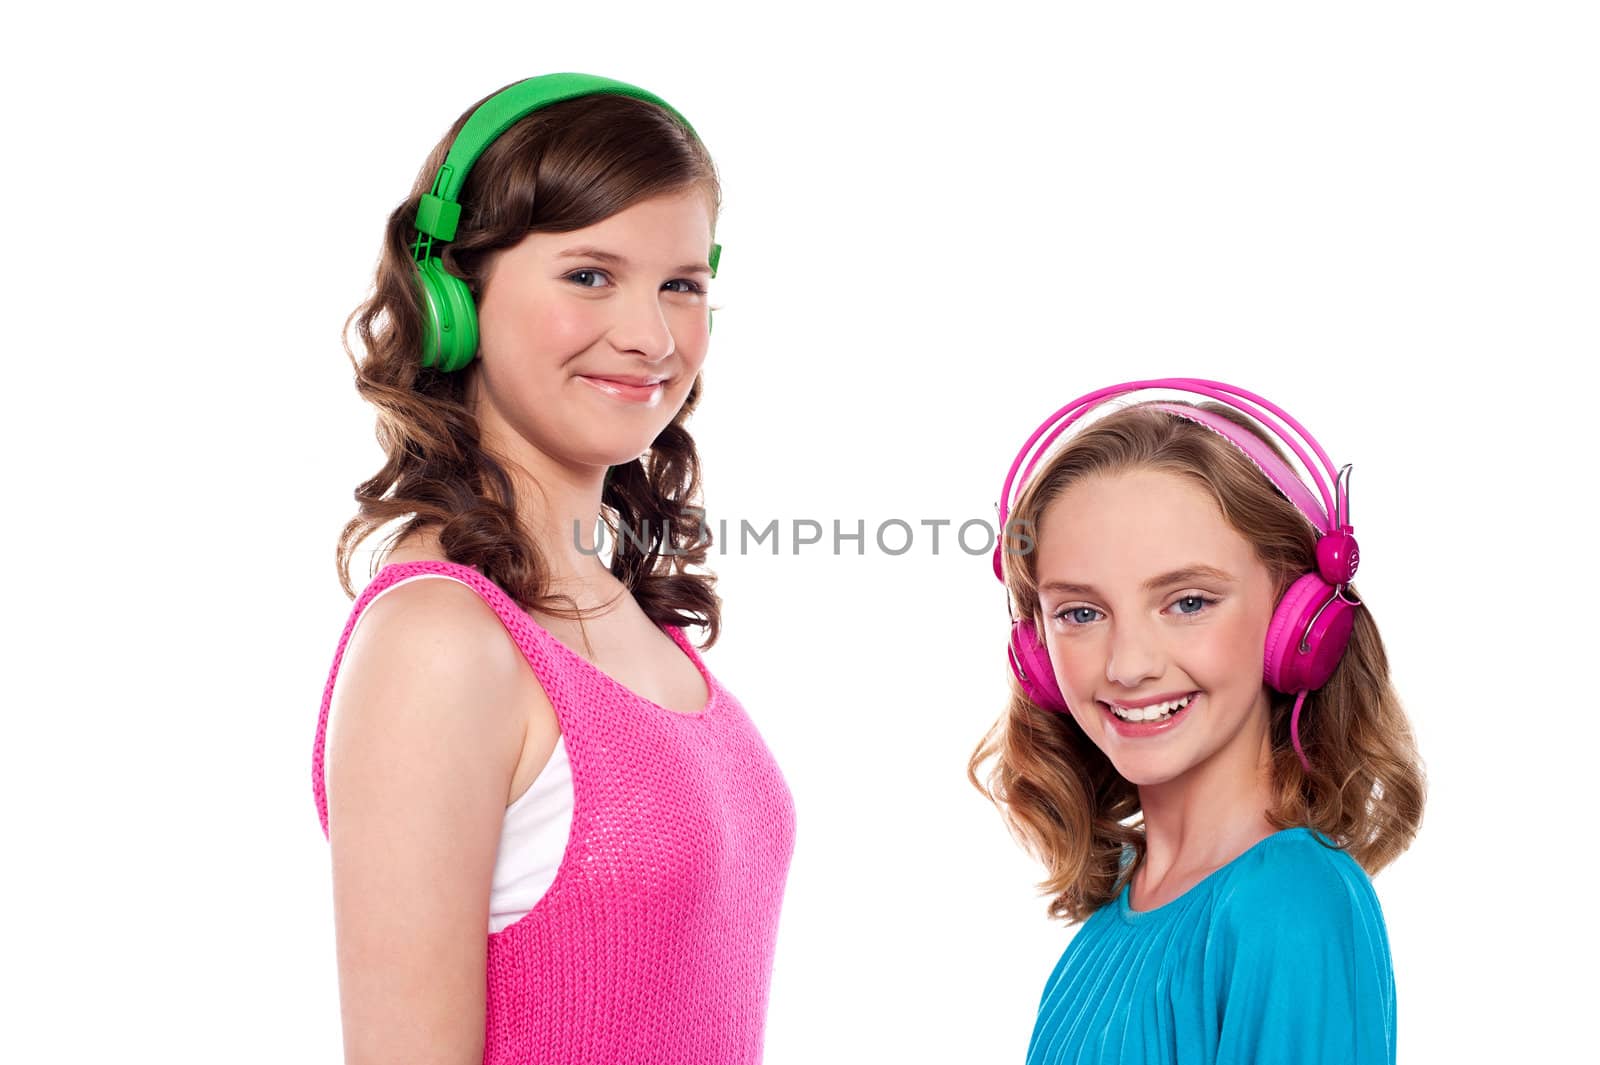 Elder and younger sisters listening to music through headphones against white background